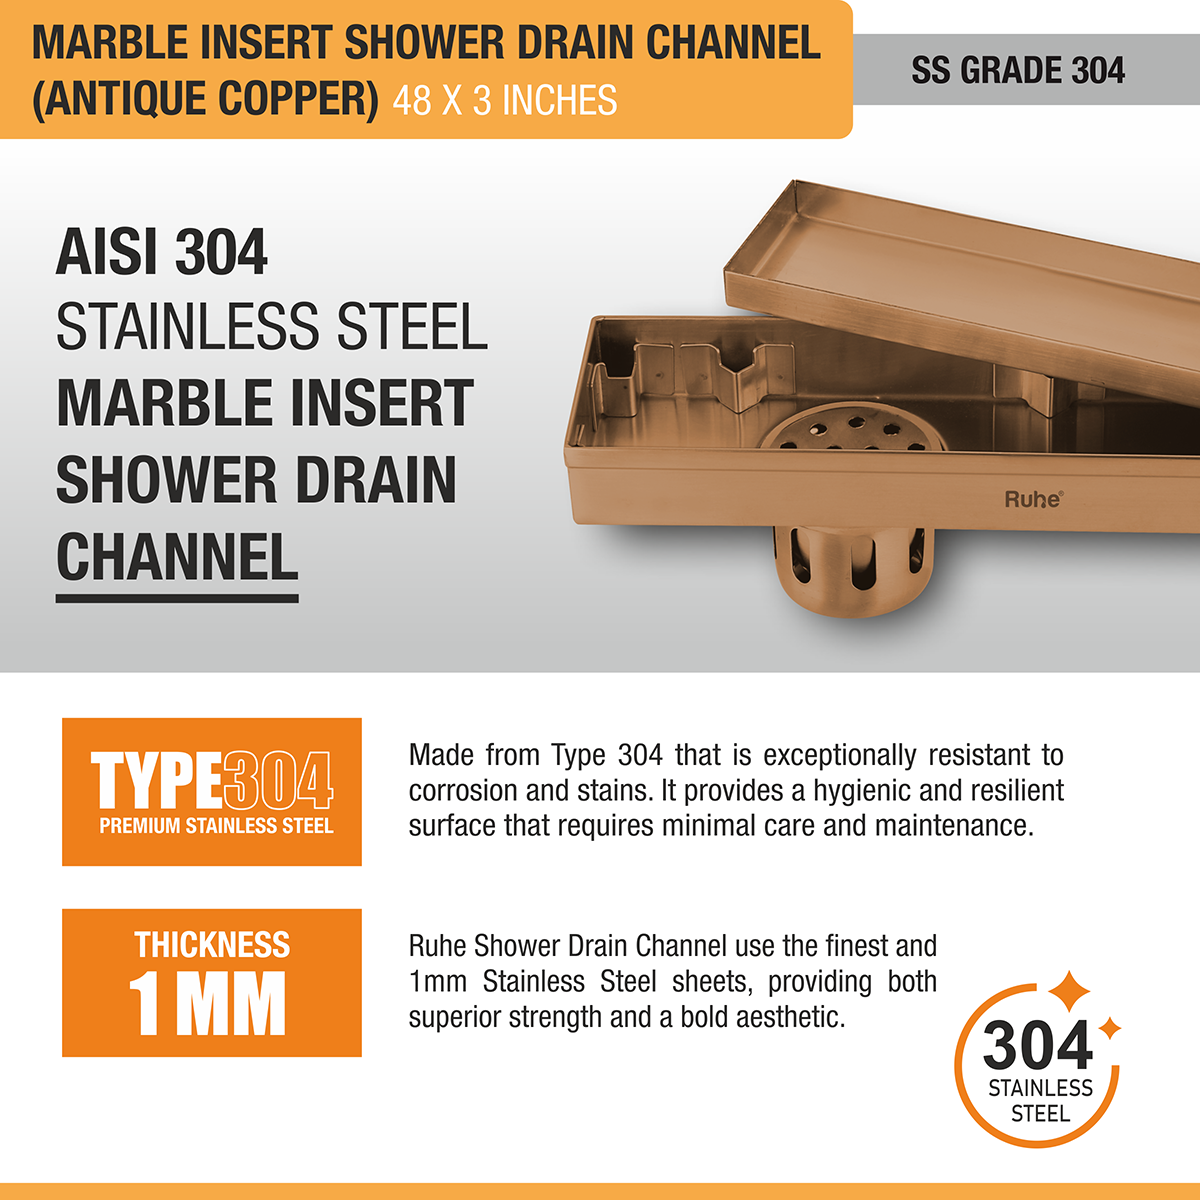 Marble Insert Shower Drain Channel (48 x 3 Inches) ROSE GOLD PVD Coated stainless steel